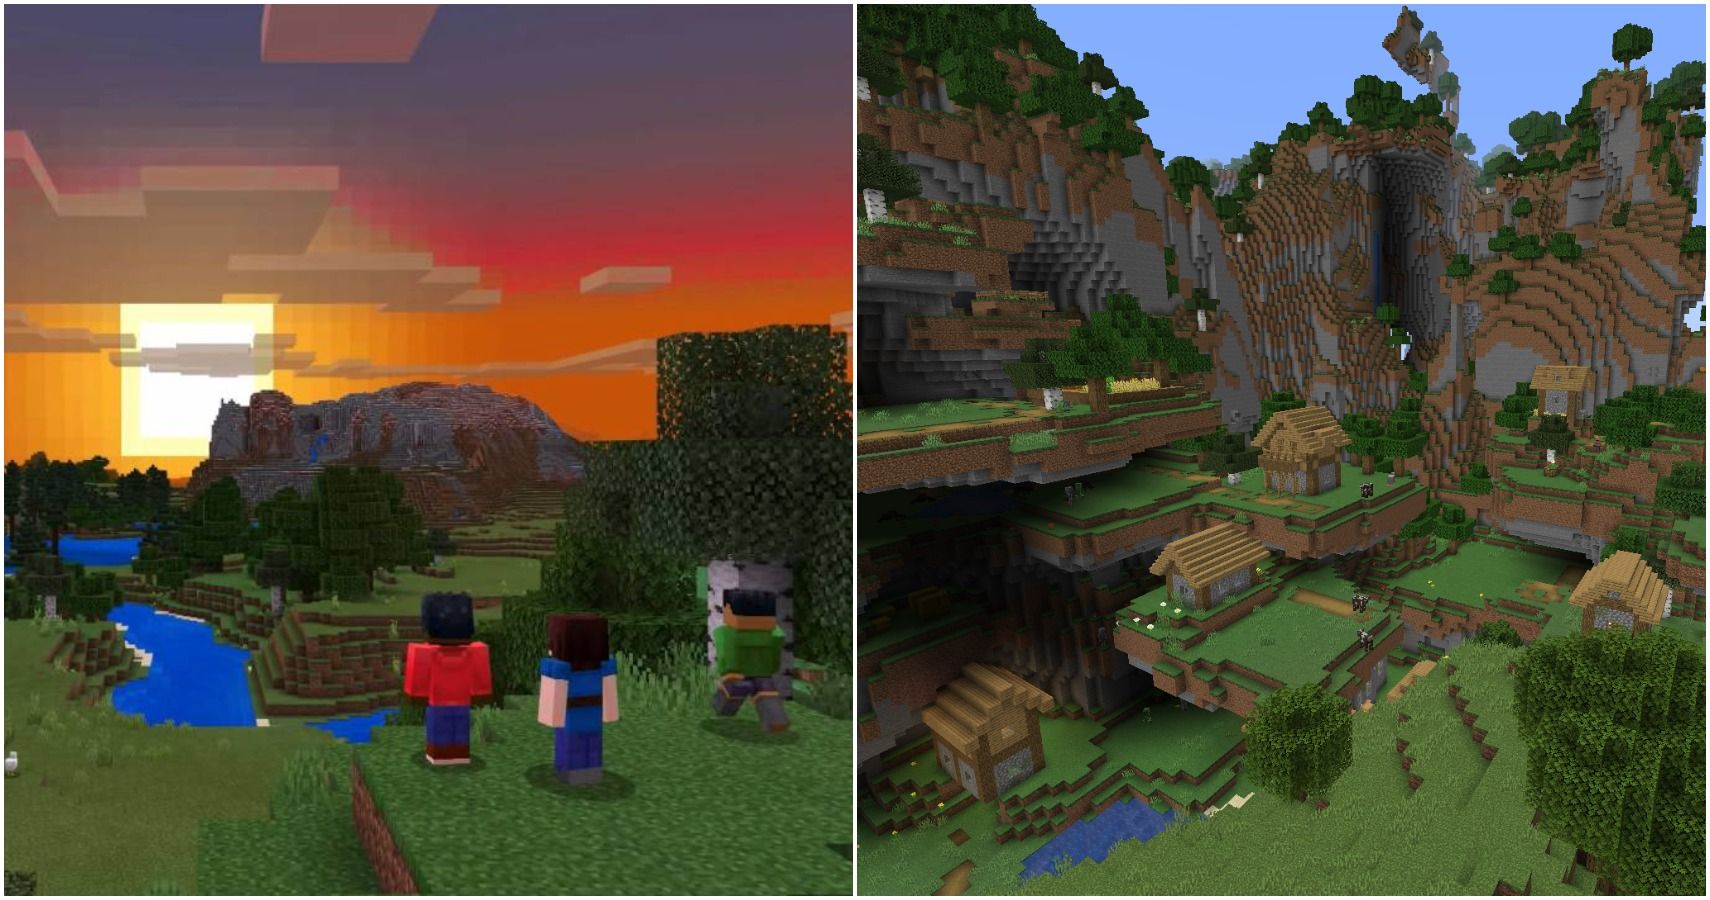 Minecraft Java Edition and Bedrock Edition are coming to Xbox Game